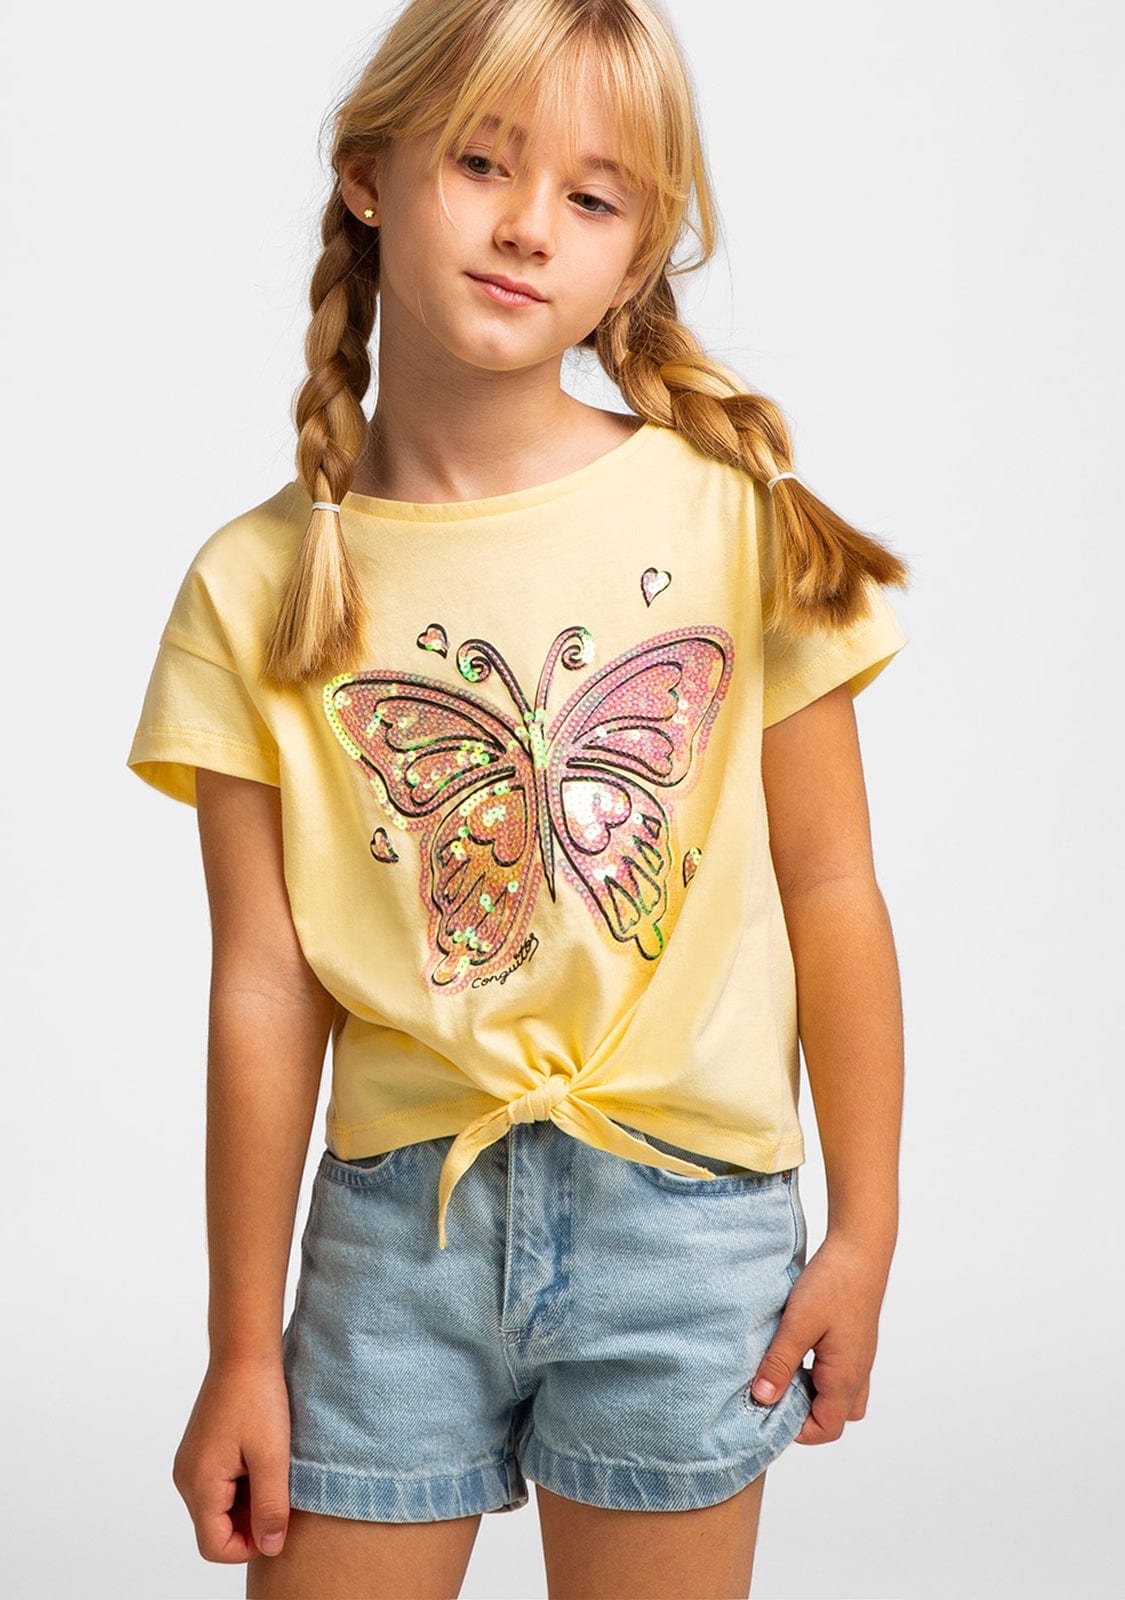 CONGUITOS TEXTIL Clothing Girl's Yellow Knotted T-Shirt